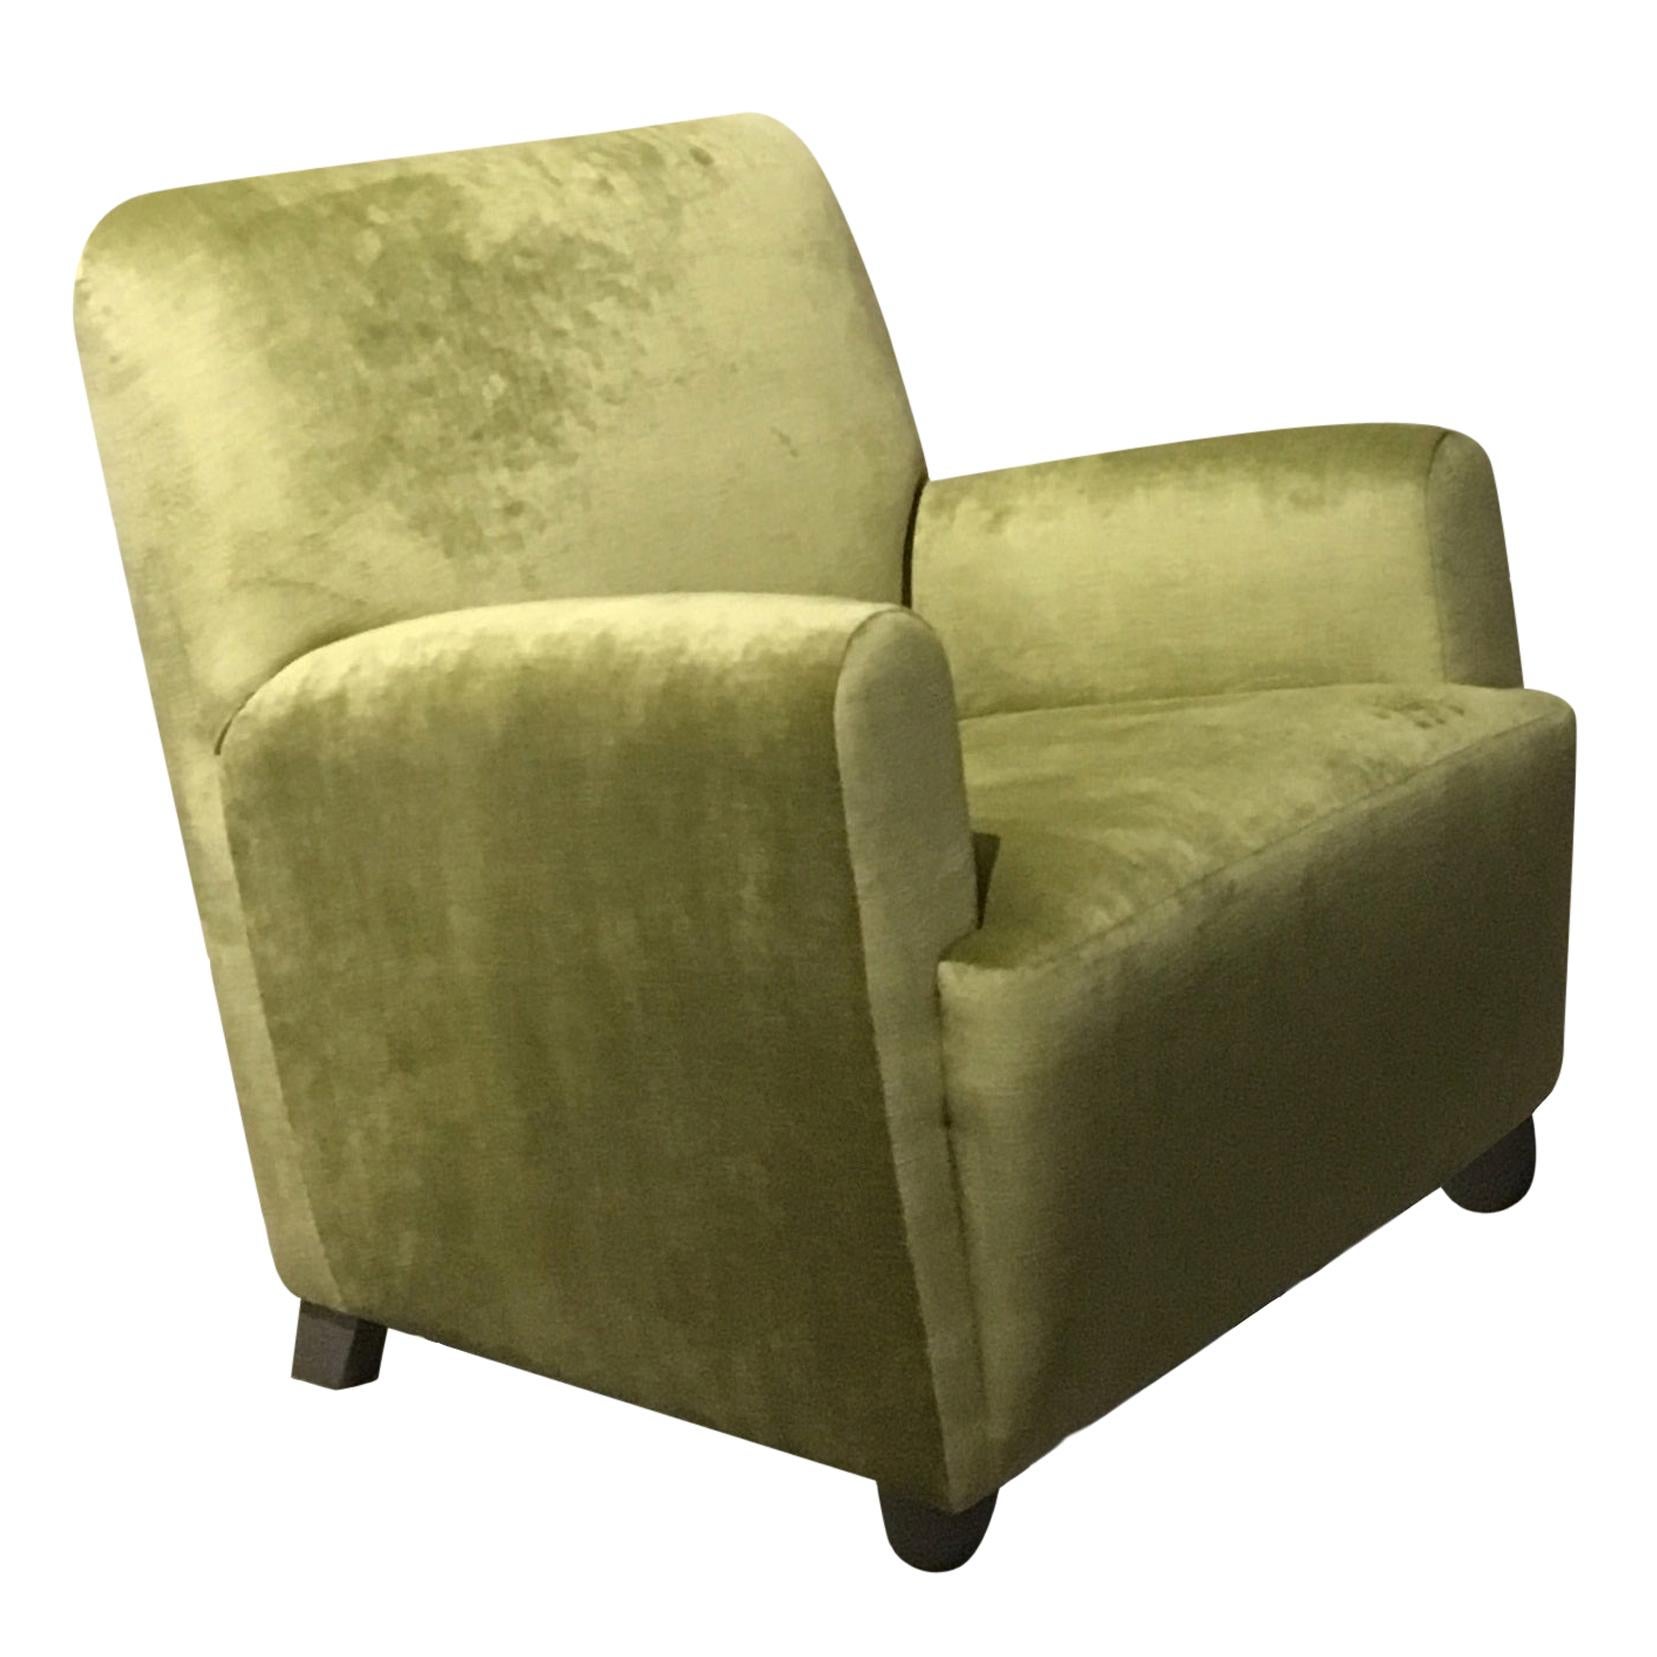 Vestry Lounge Chair For Sale